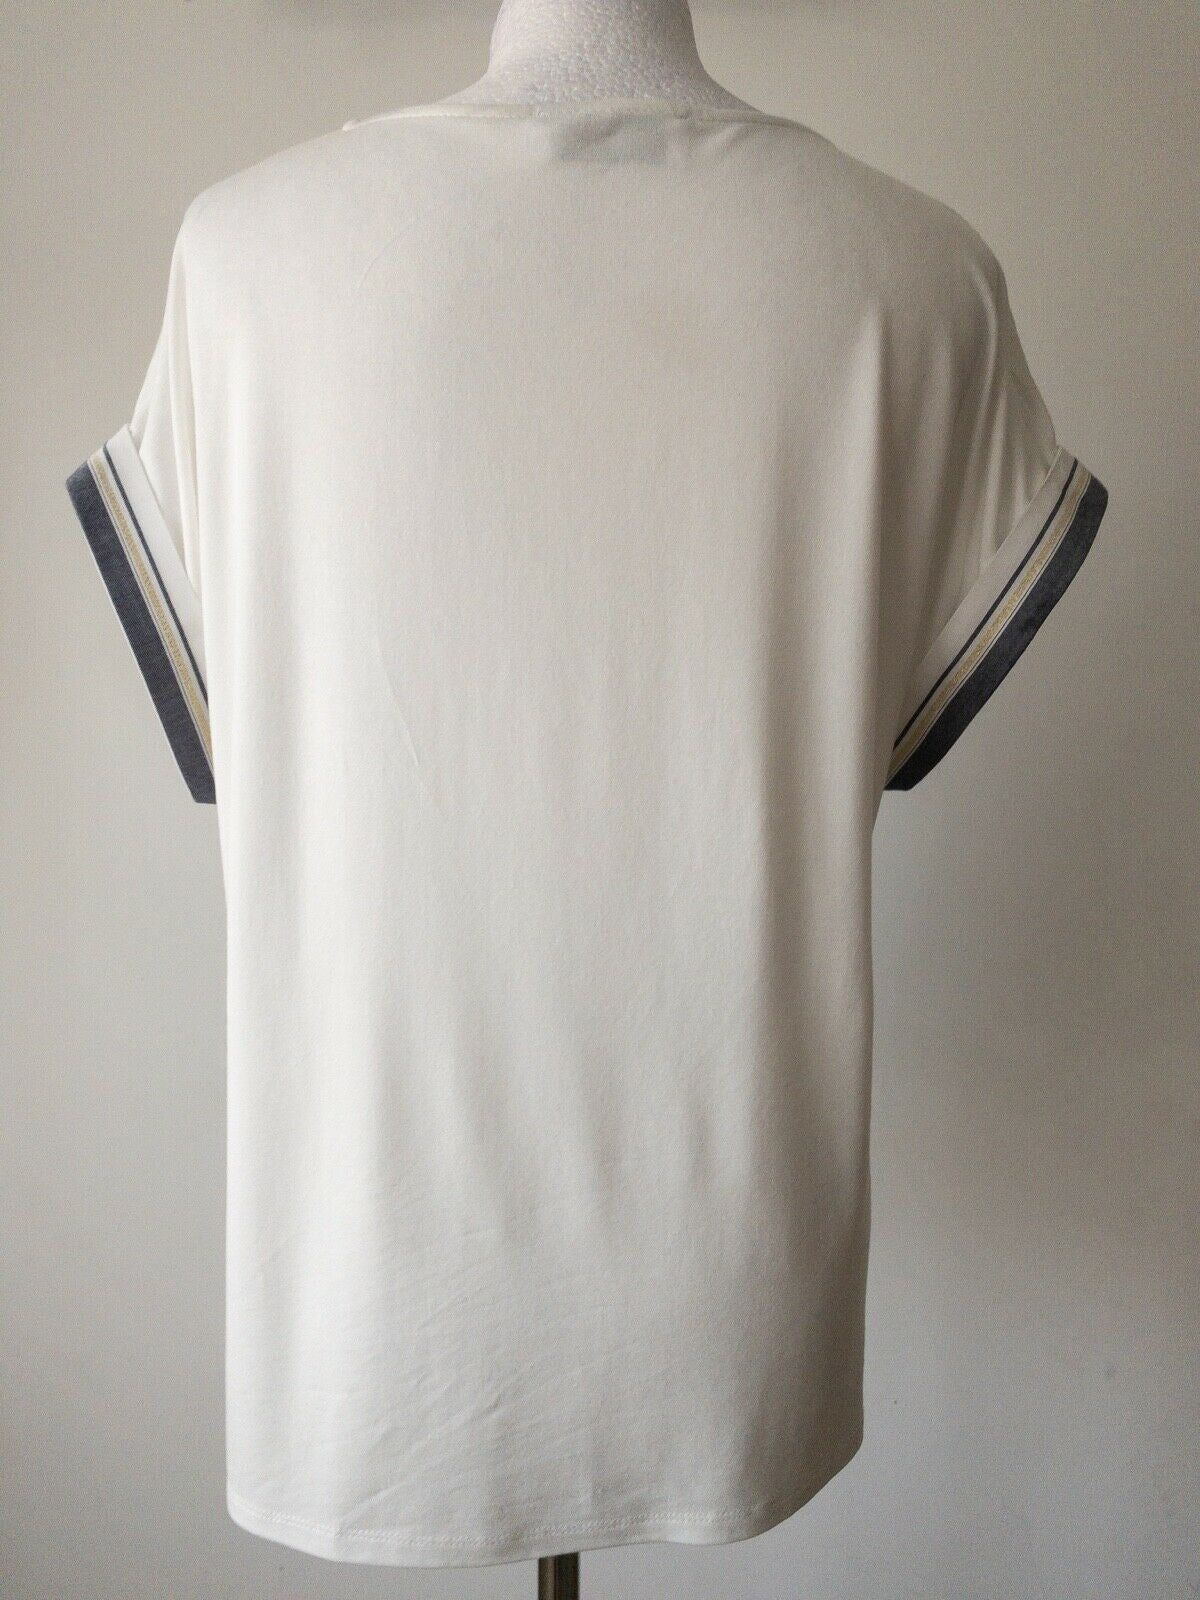 Contrast T-Shirt Striped Front Solid Back Size 10 Metallic Thread